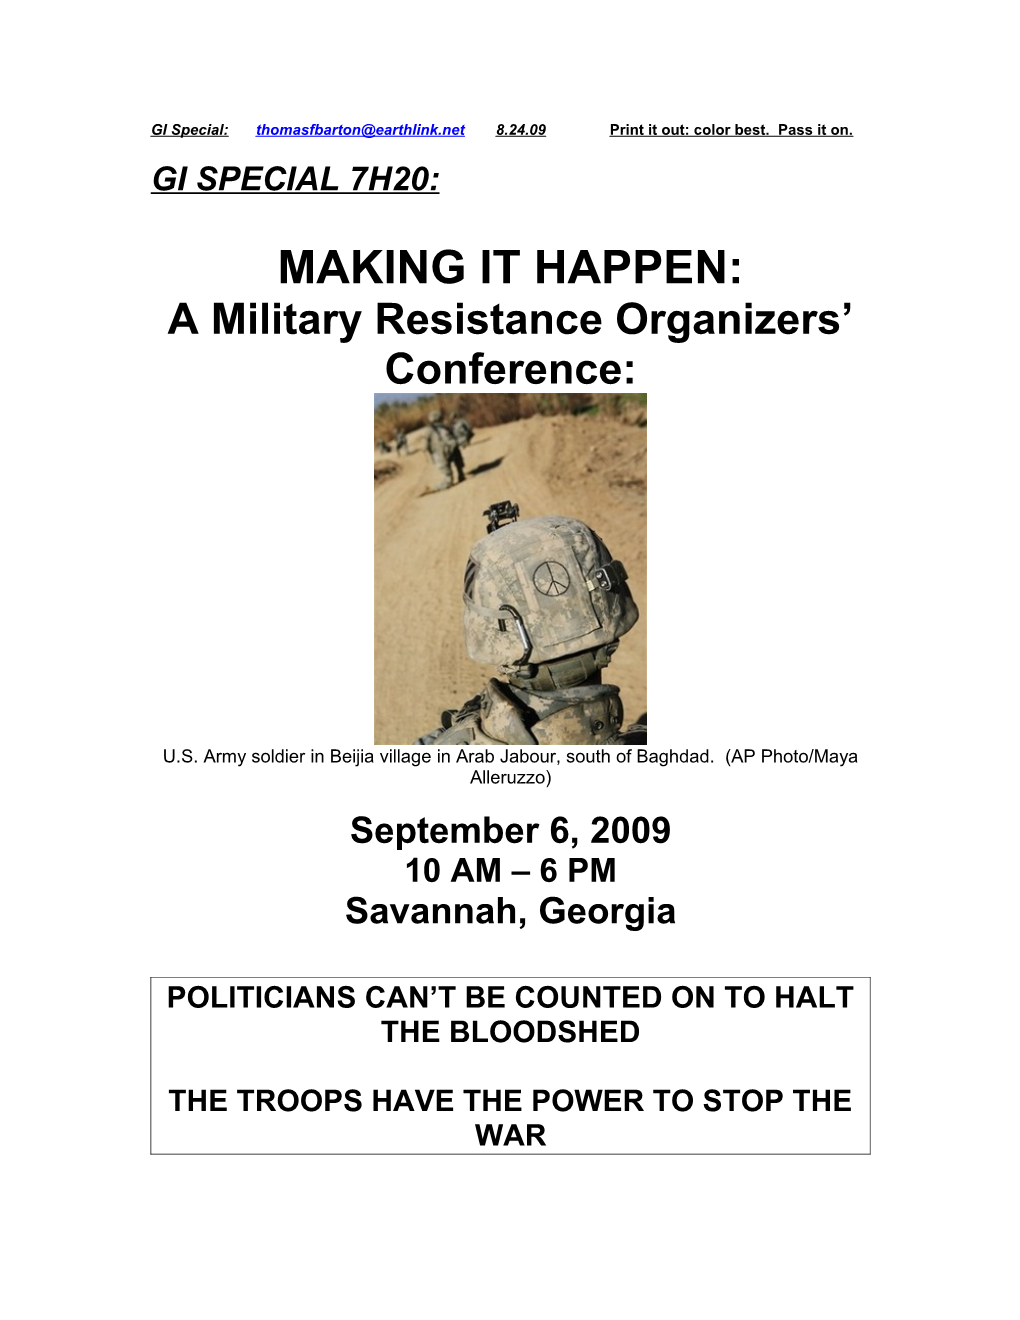 A Military Resistance Organizers Conference